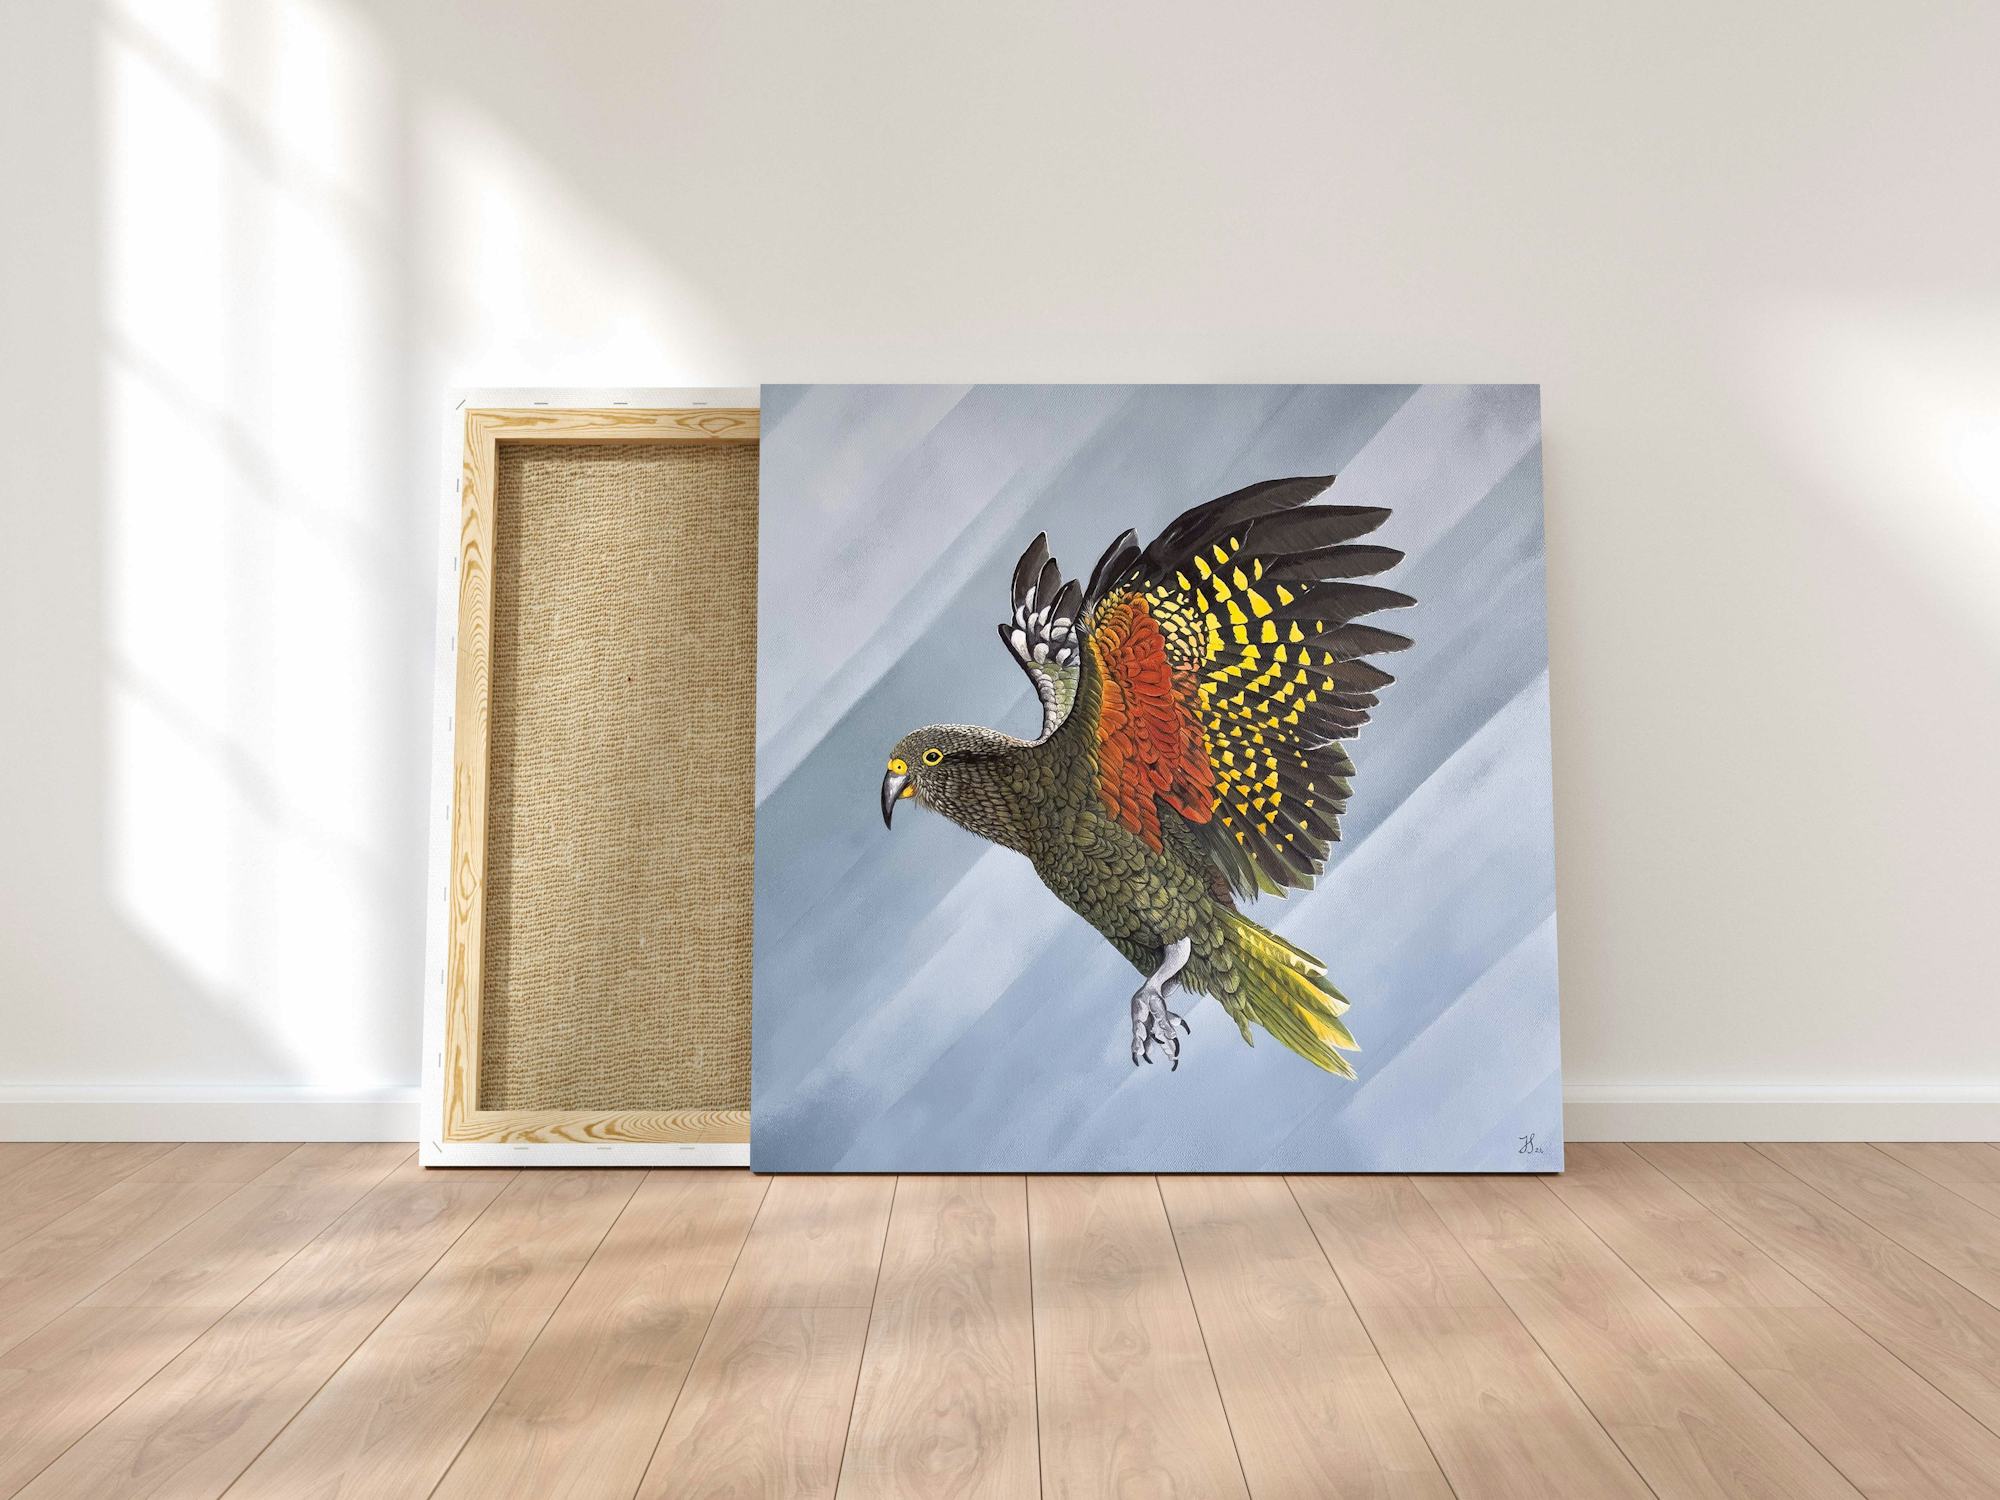 Painting of a NZ native Kea bird on canvas, leaned against a wall.